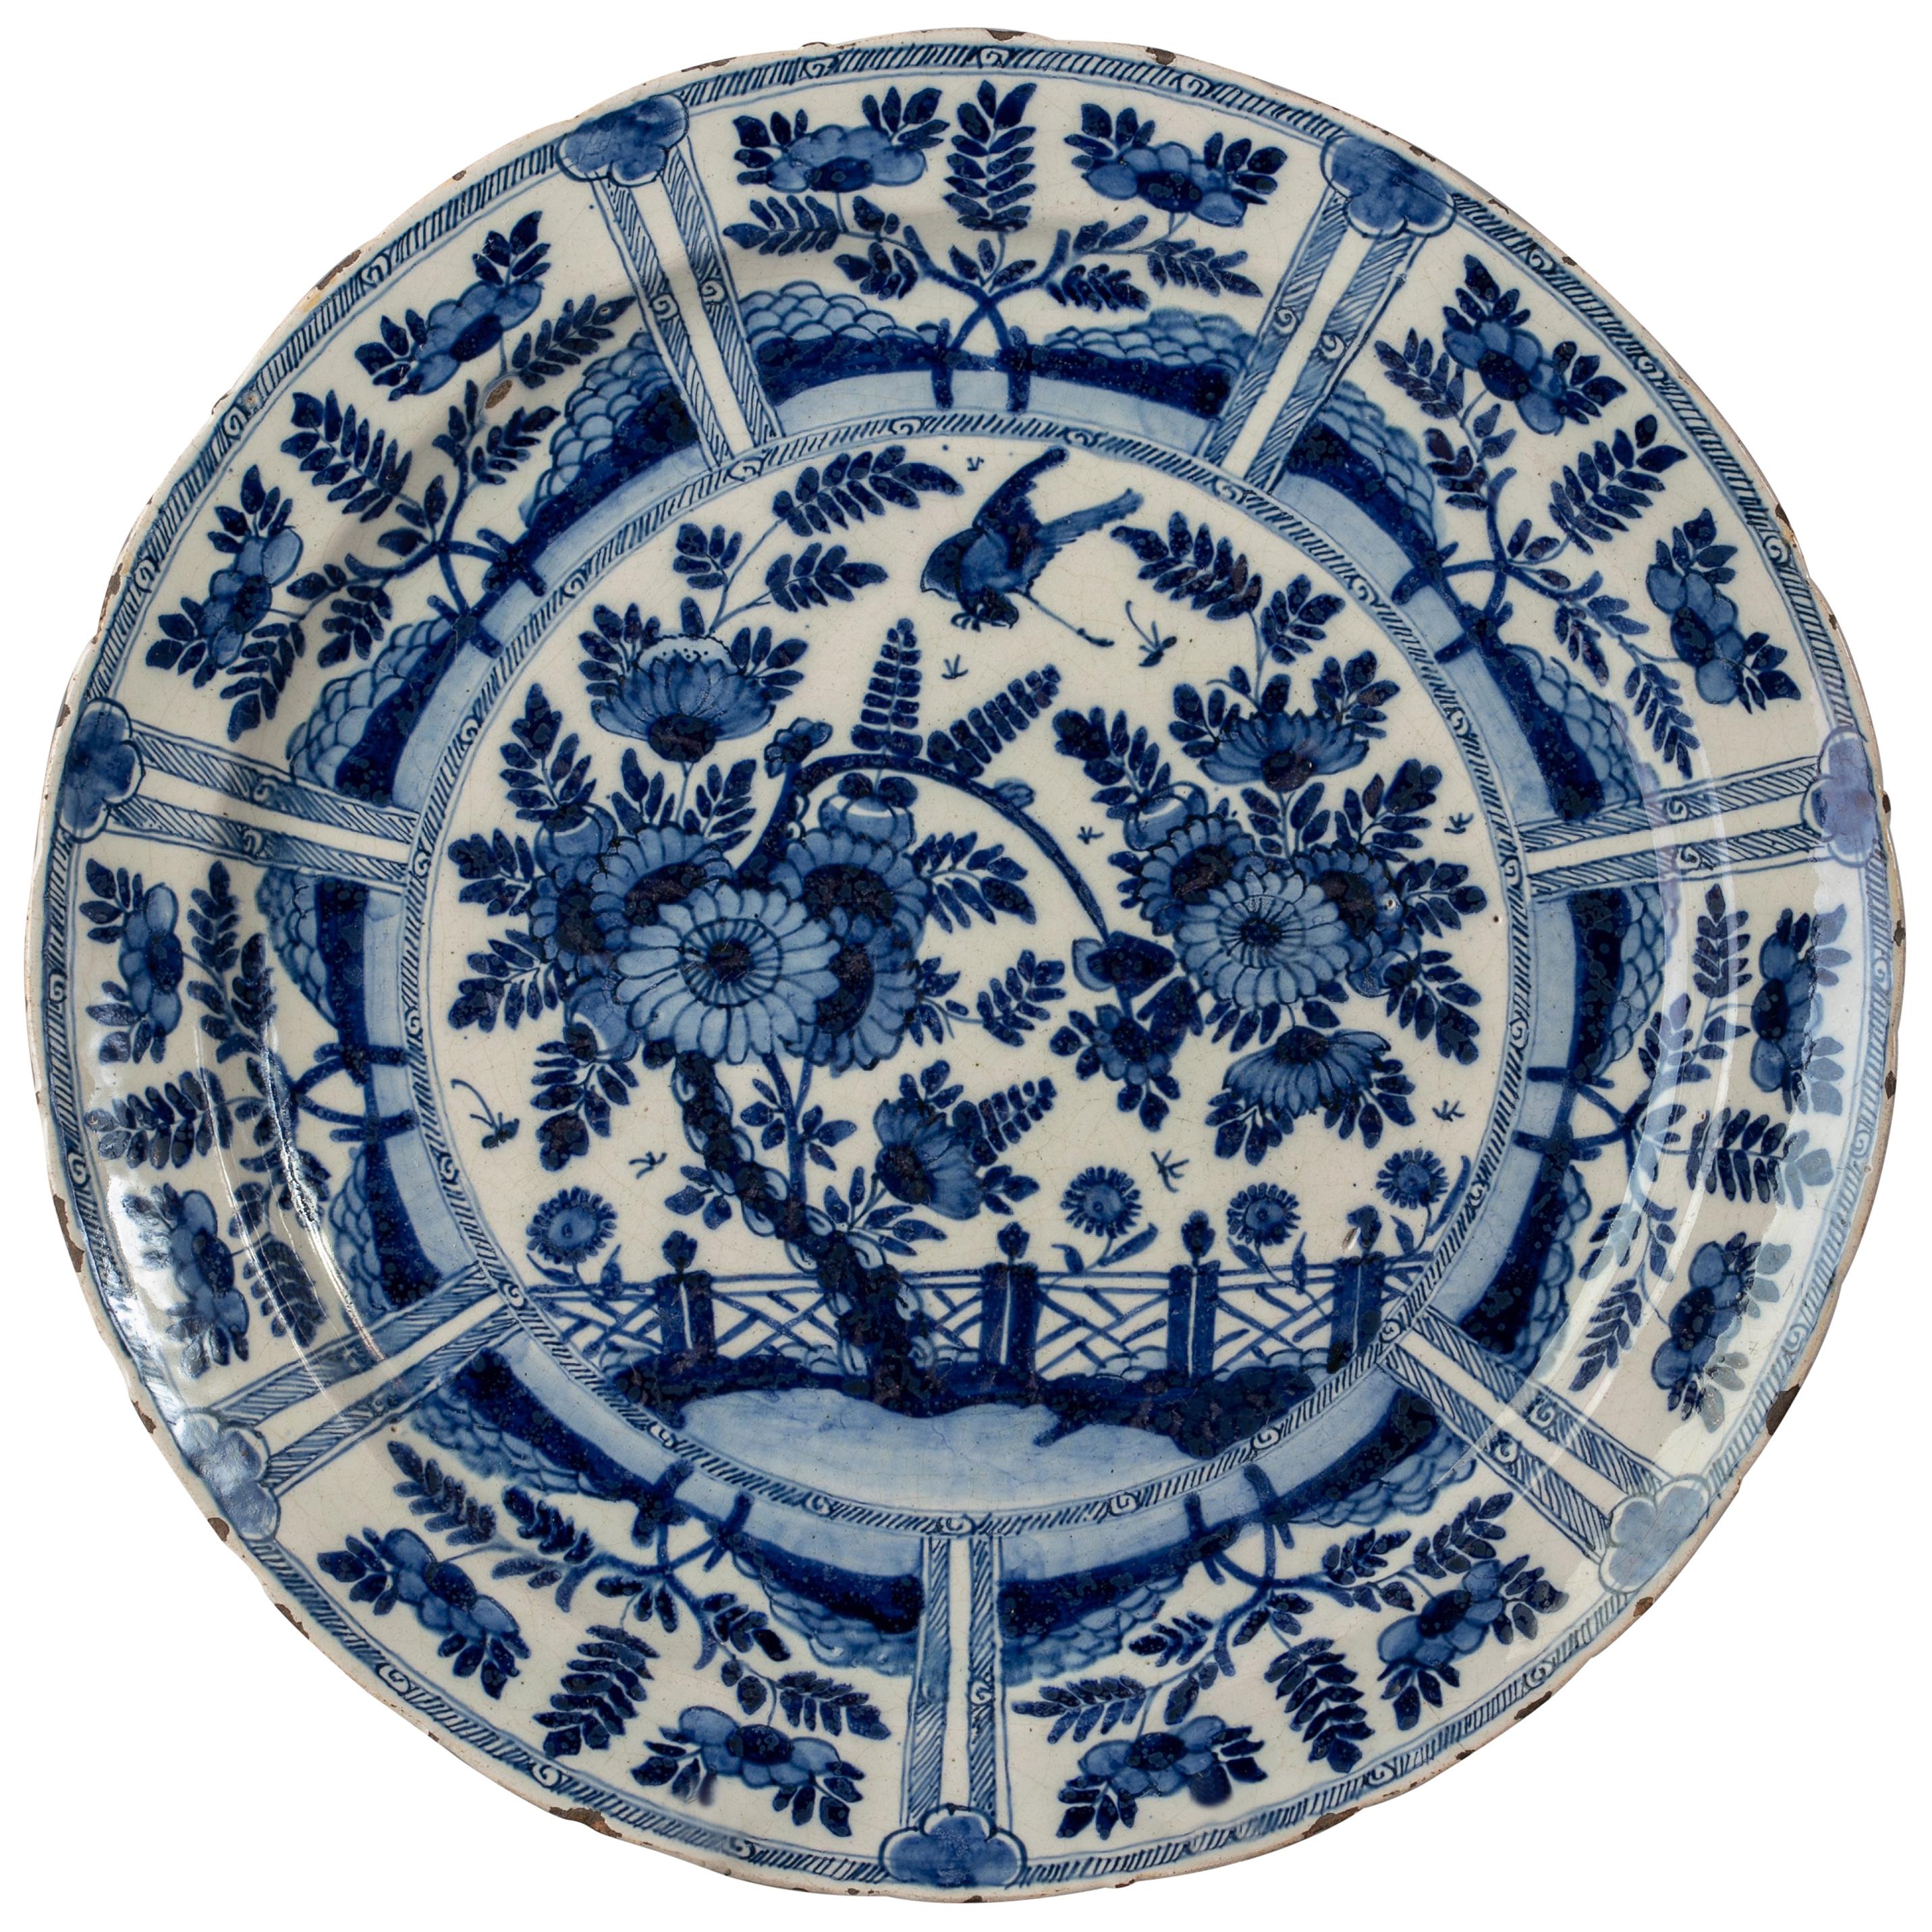 Large Delft Blue and White Charger, Late 17th Century